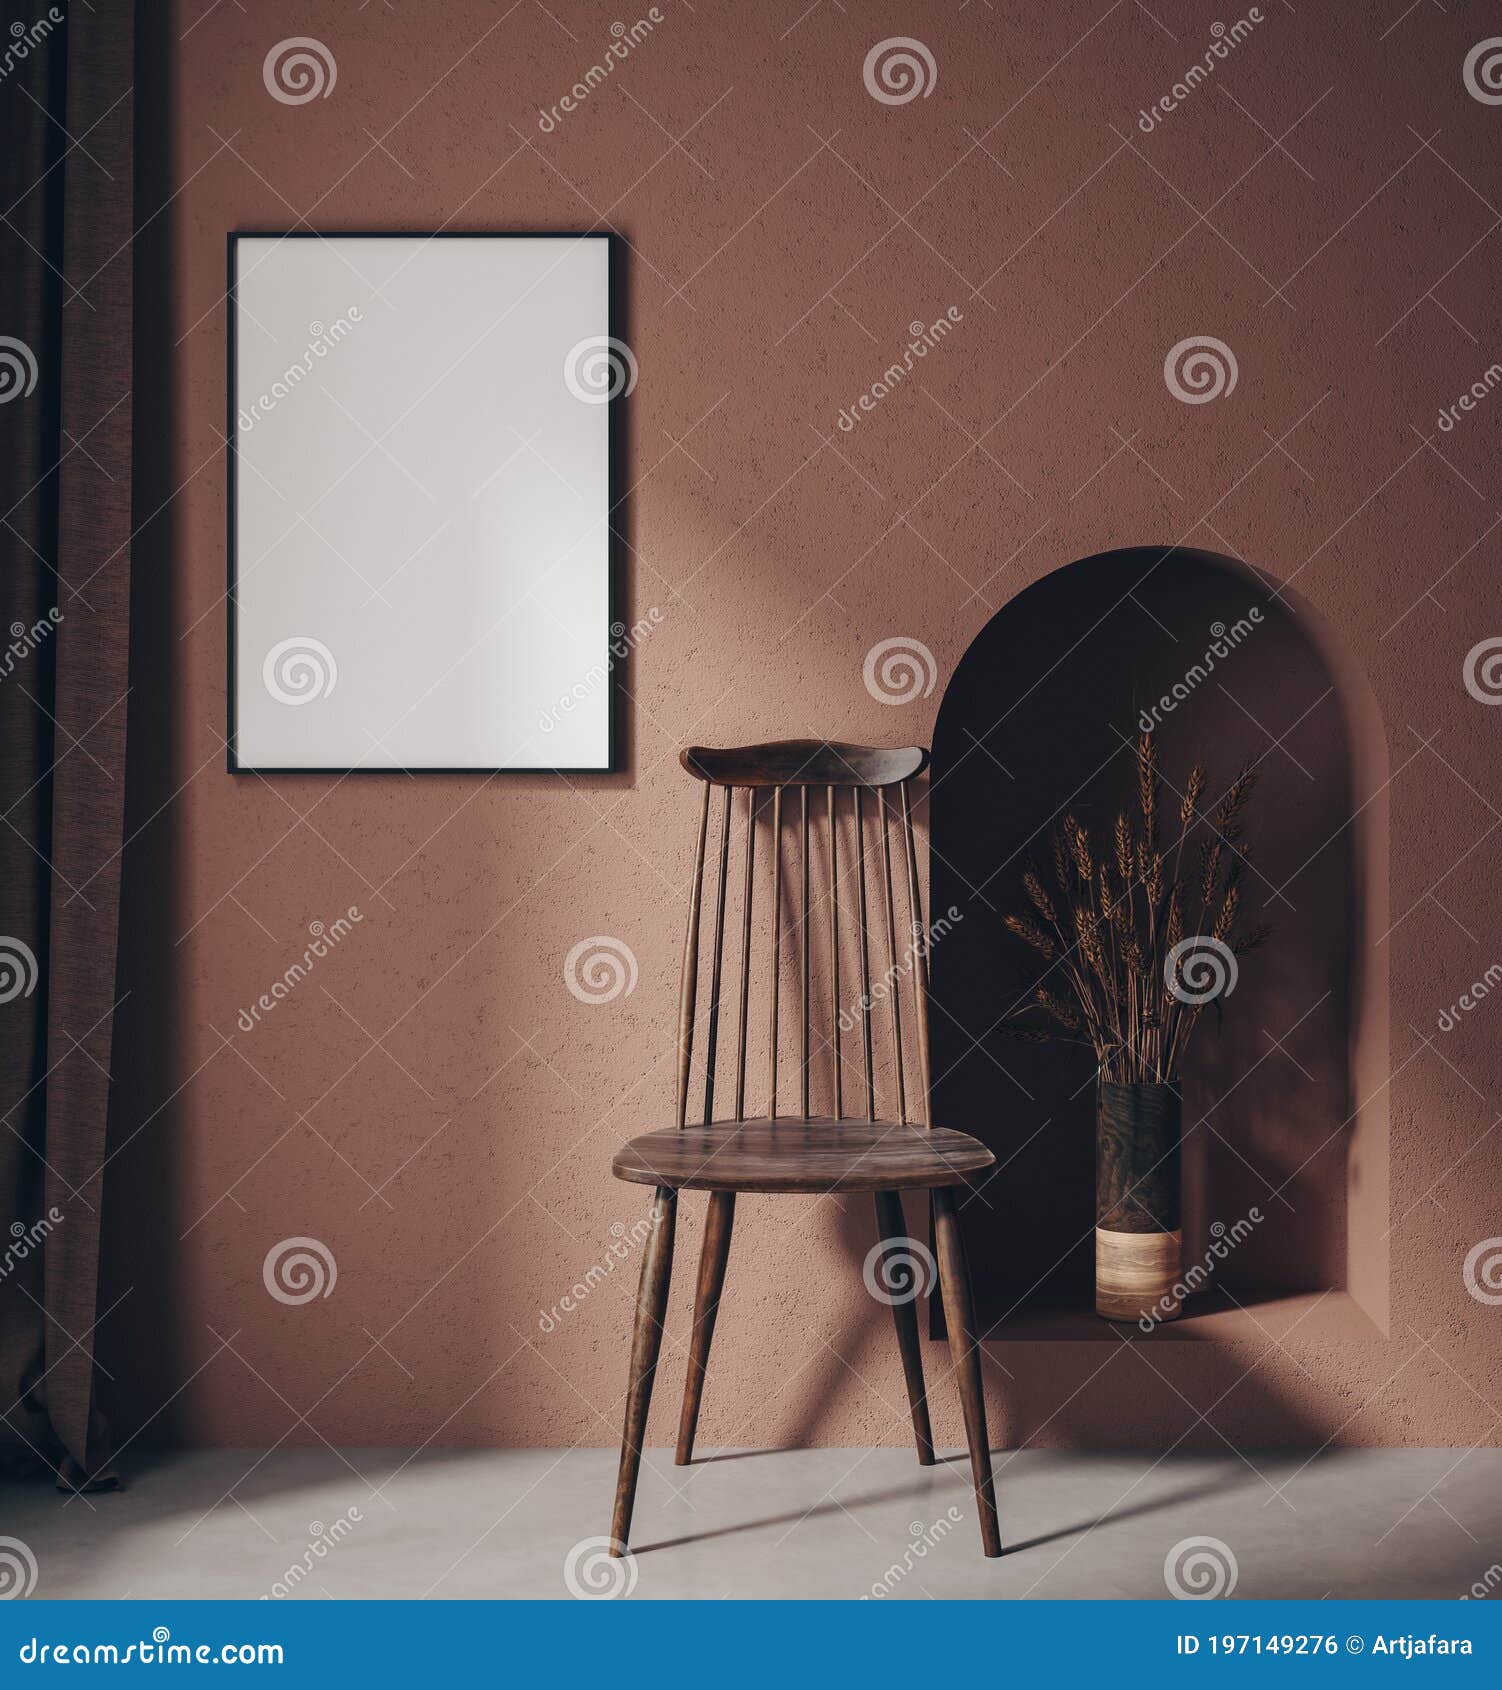 mock up poster in home interior with minimal furniture